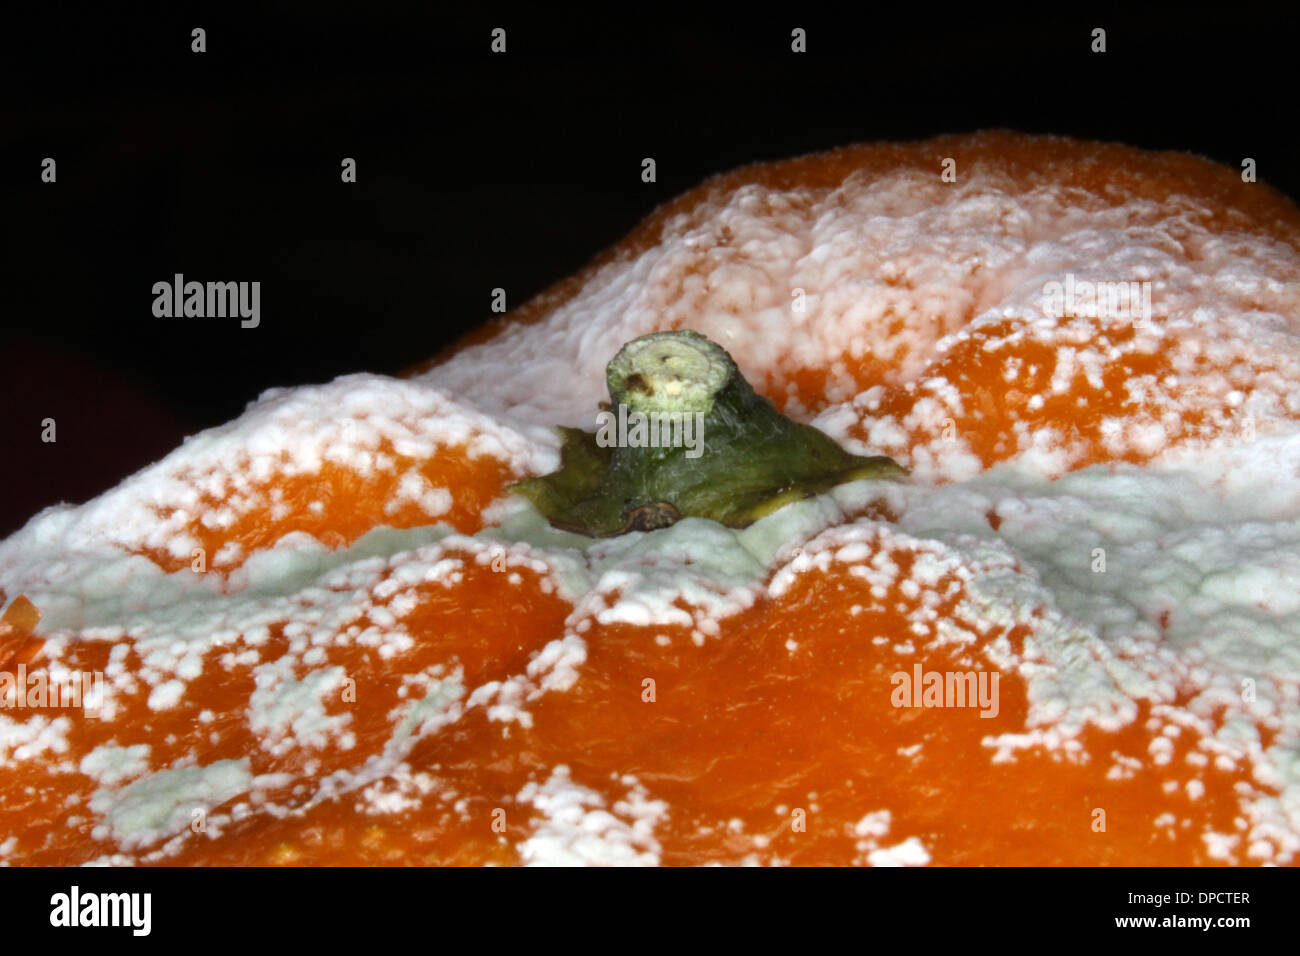 A satsuma with mould growing on its skin Stock Photo